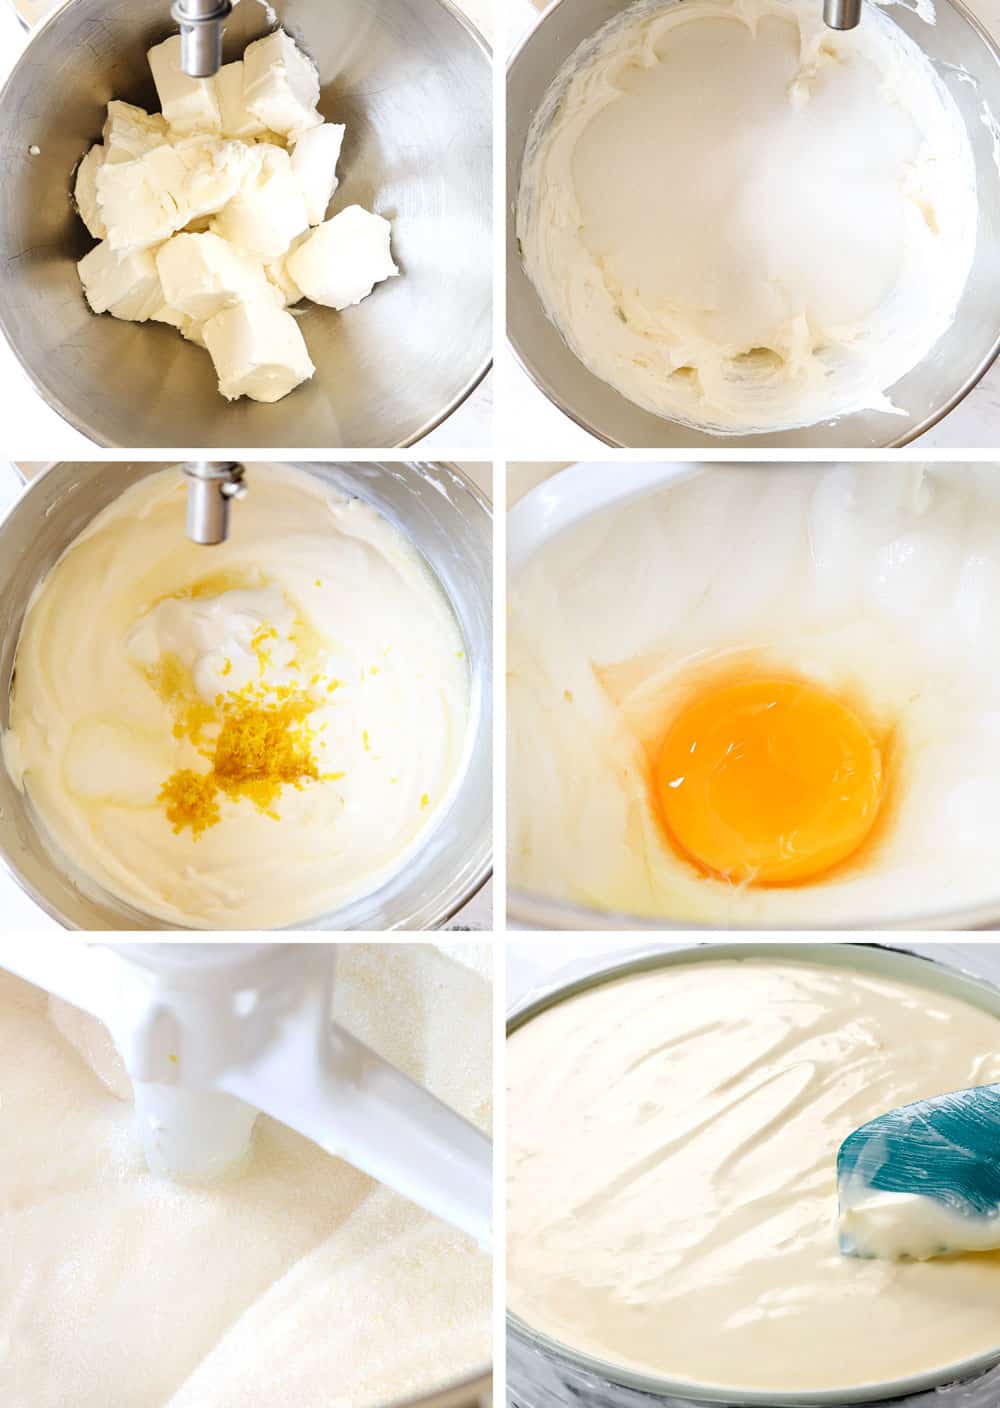 a collage showing how to make lemon cheesecake recipe by 1) beating cream cheese until creamy, 2) adding sugar and beating until smooth, 3) adding lemon zest and sour cream, 4) adding eggs, 5) beating until creamy, 6) adding cheesecake to springform pan